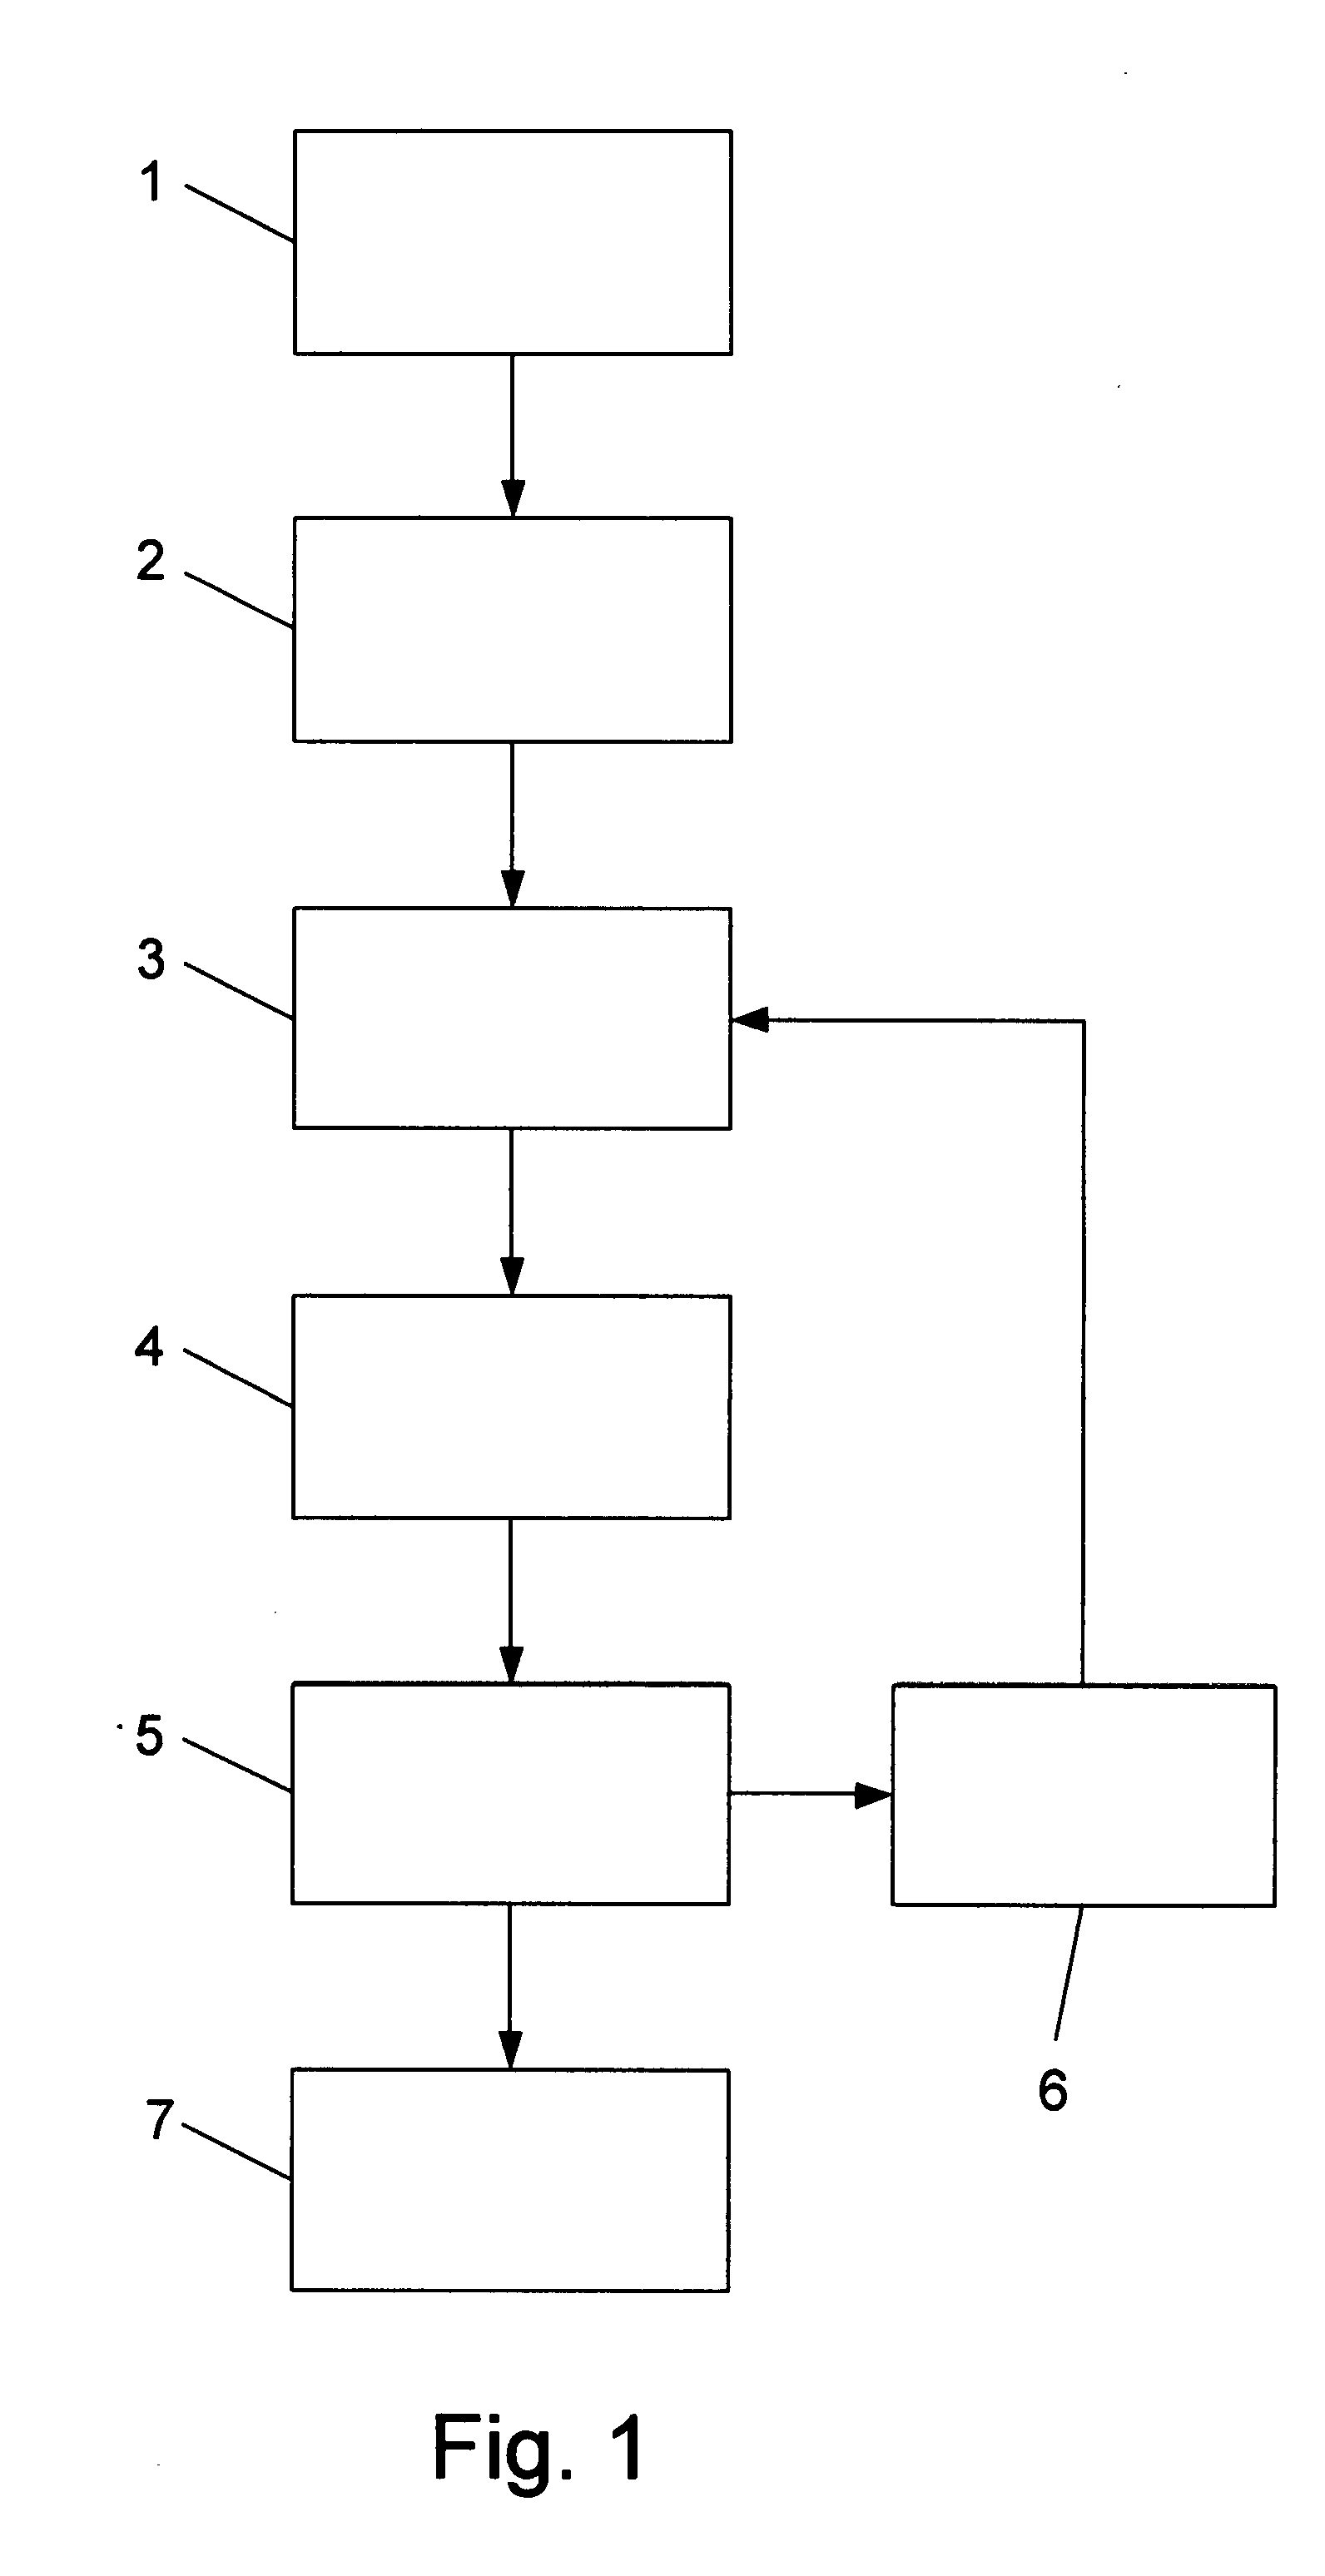 Method for allowing exchange of permissible information between users in a hosting website